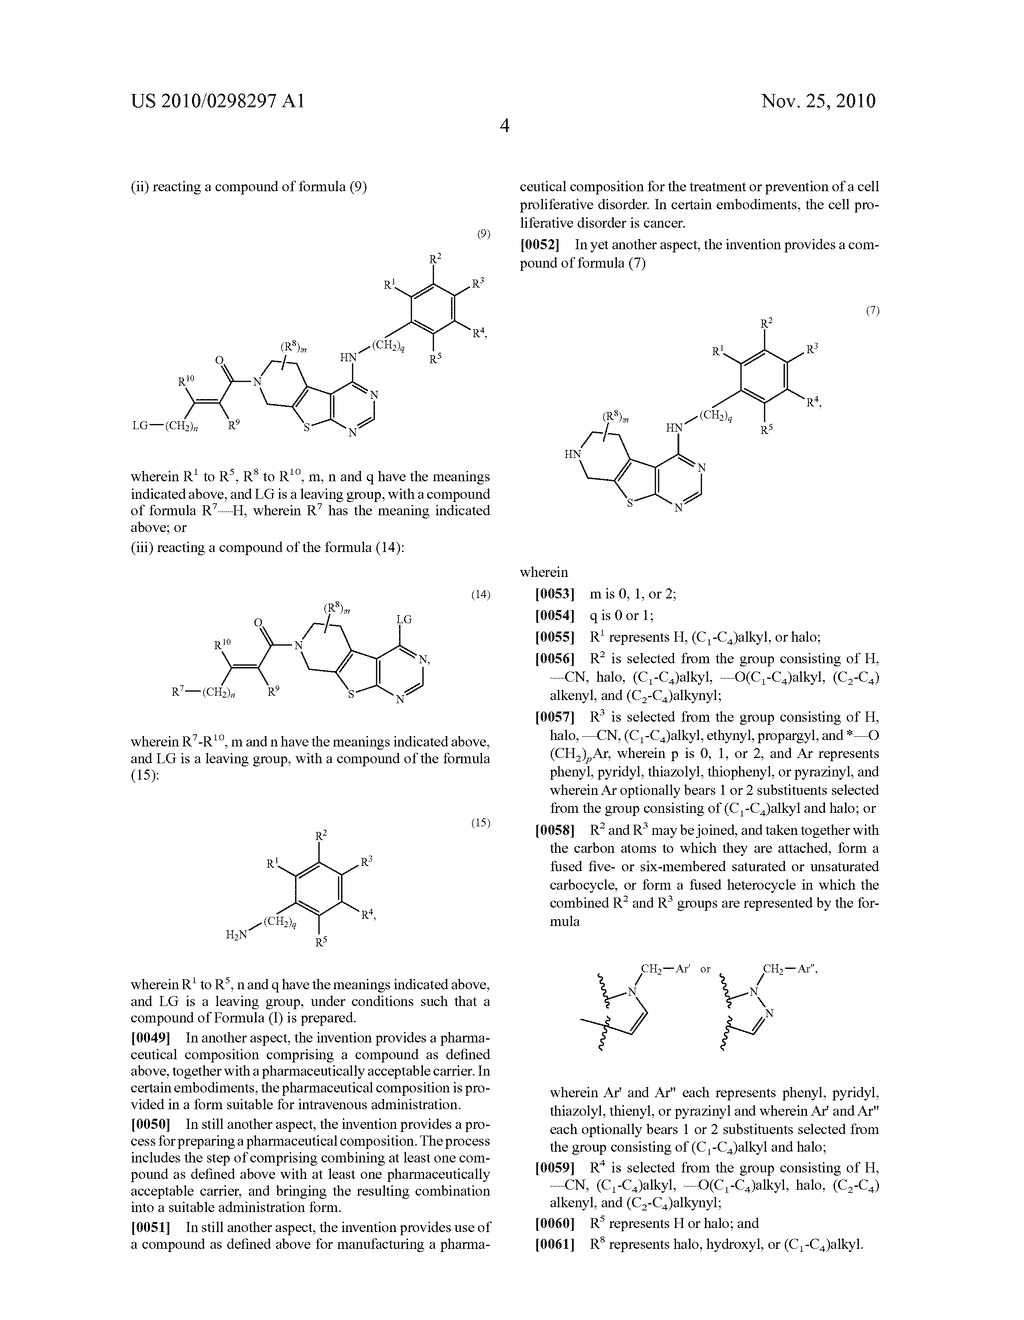 Tetrahydropyridothienopyrimidine Compounds and Methods of Use Thereof - diagram, schematic, and image 05